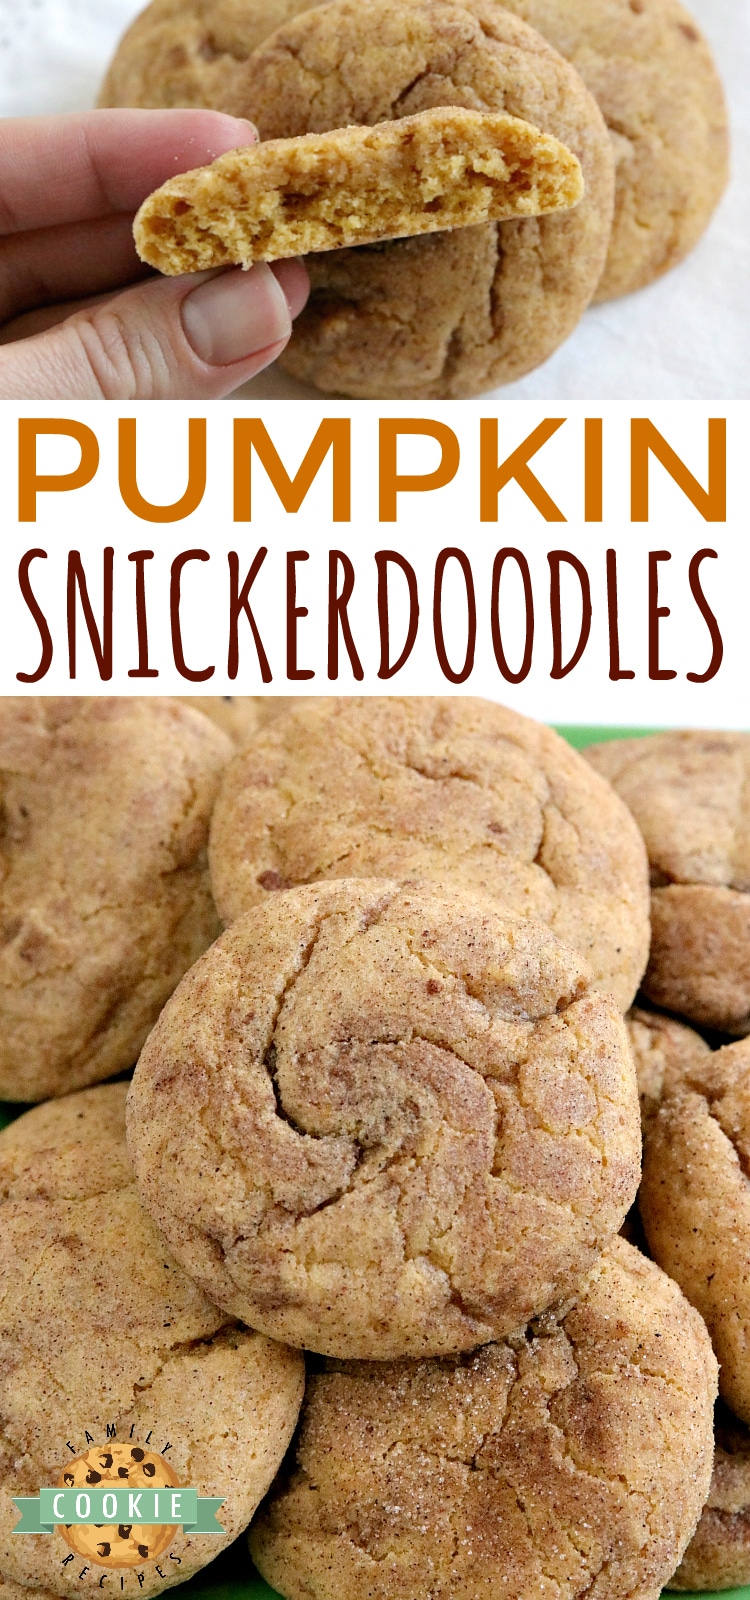 Pumpkin Snickerdoodles are soft, chewy and packed with pumpkin flavor! These delicious pumpkin cookies are rolled in cinnamon and sugar - one of my favorite fall cookie recipes! via @buttergirls